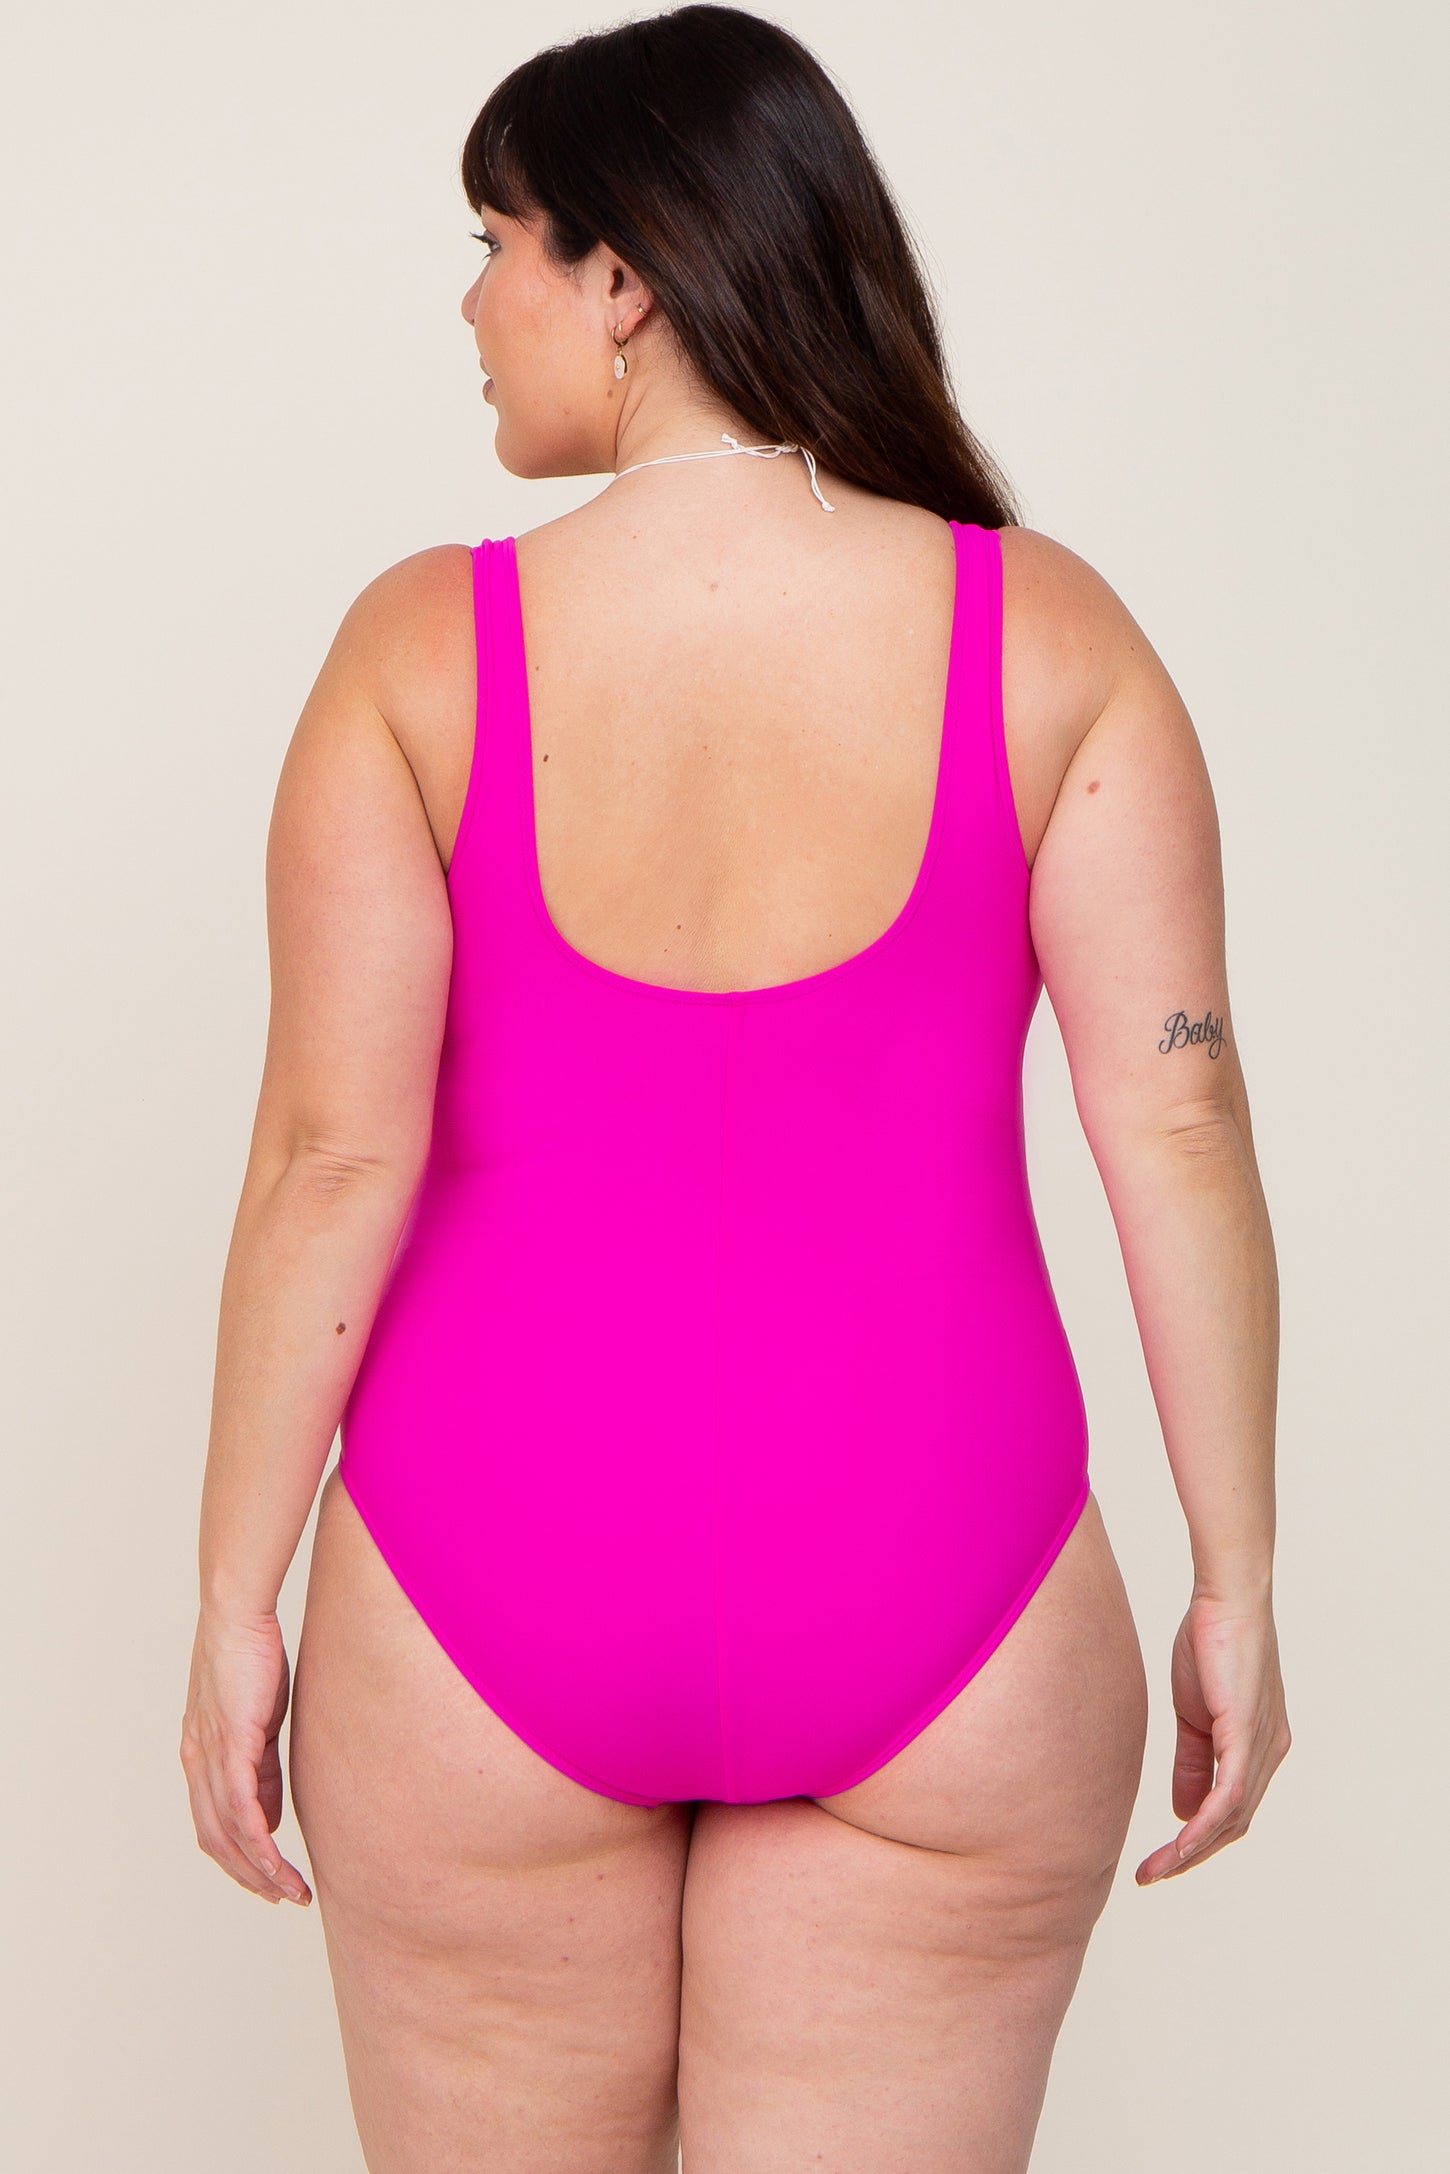 Swimsuits For All Women's Plus Size Cup Sized Mesh Underwire One Piece  Swimsuit 16 D/Dd Fluorescent Pink 